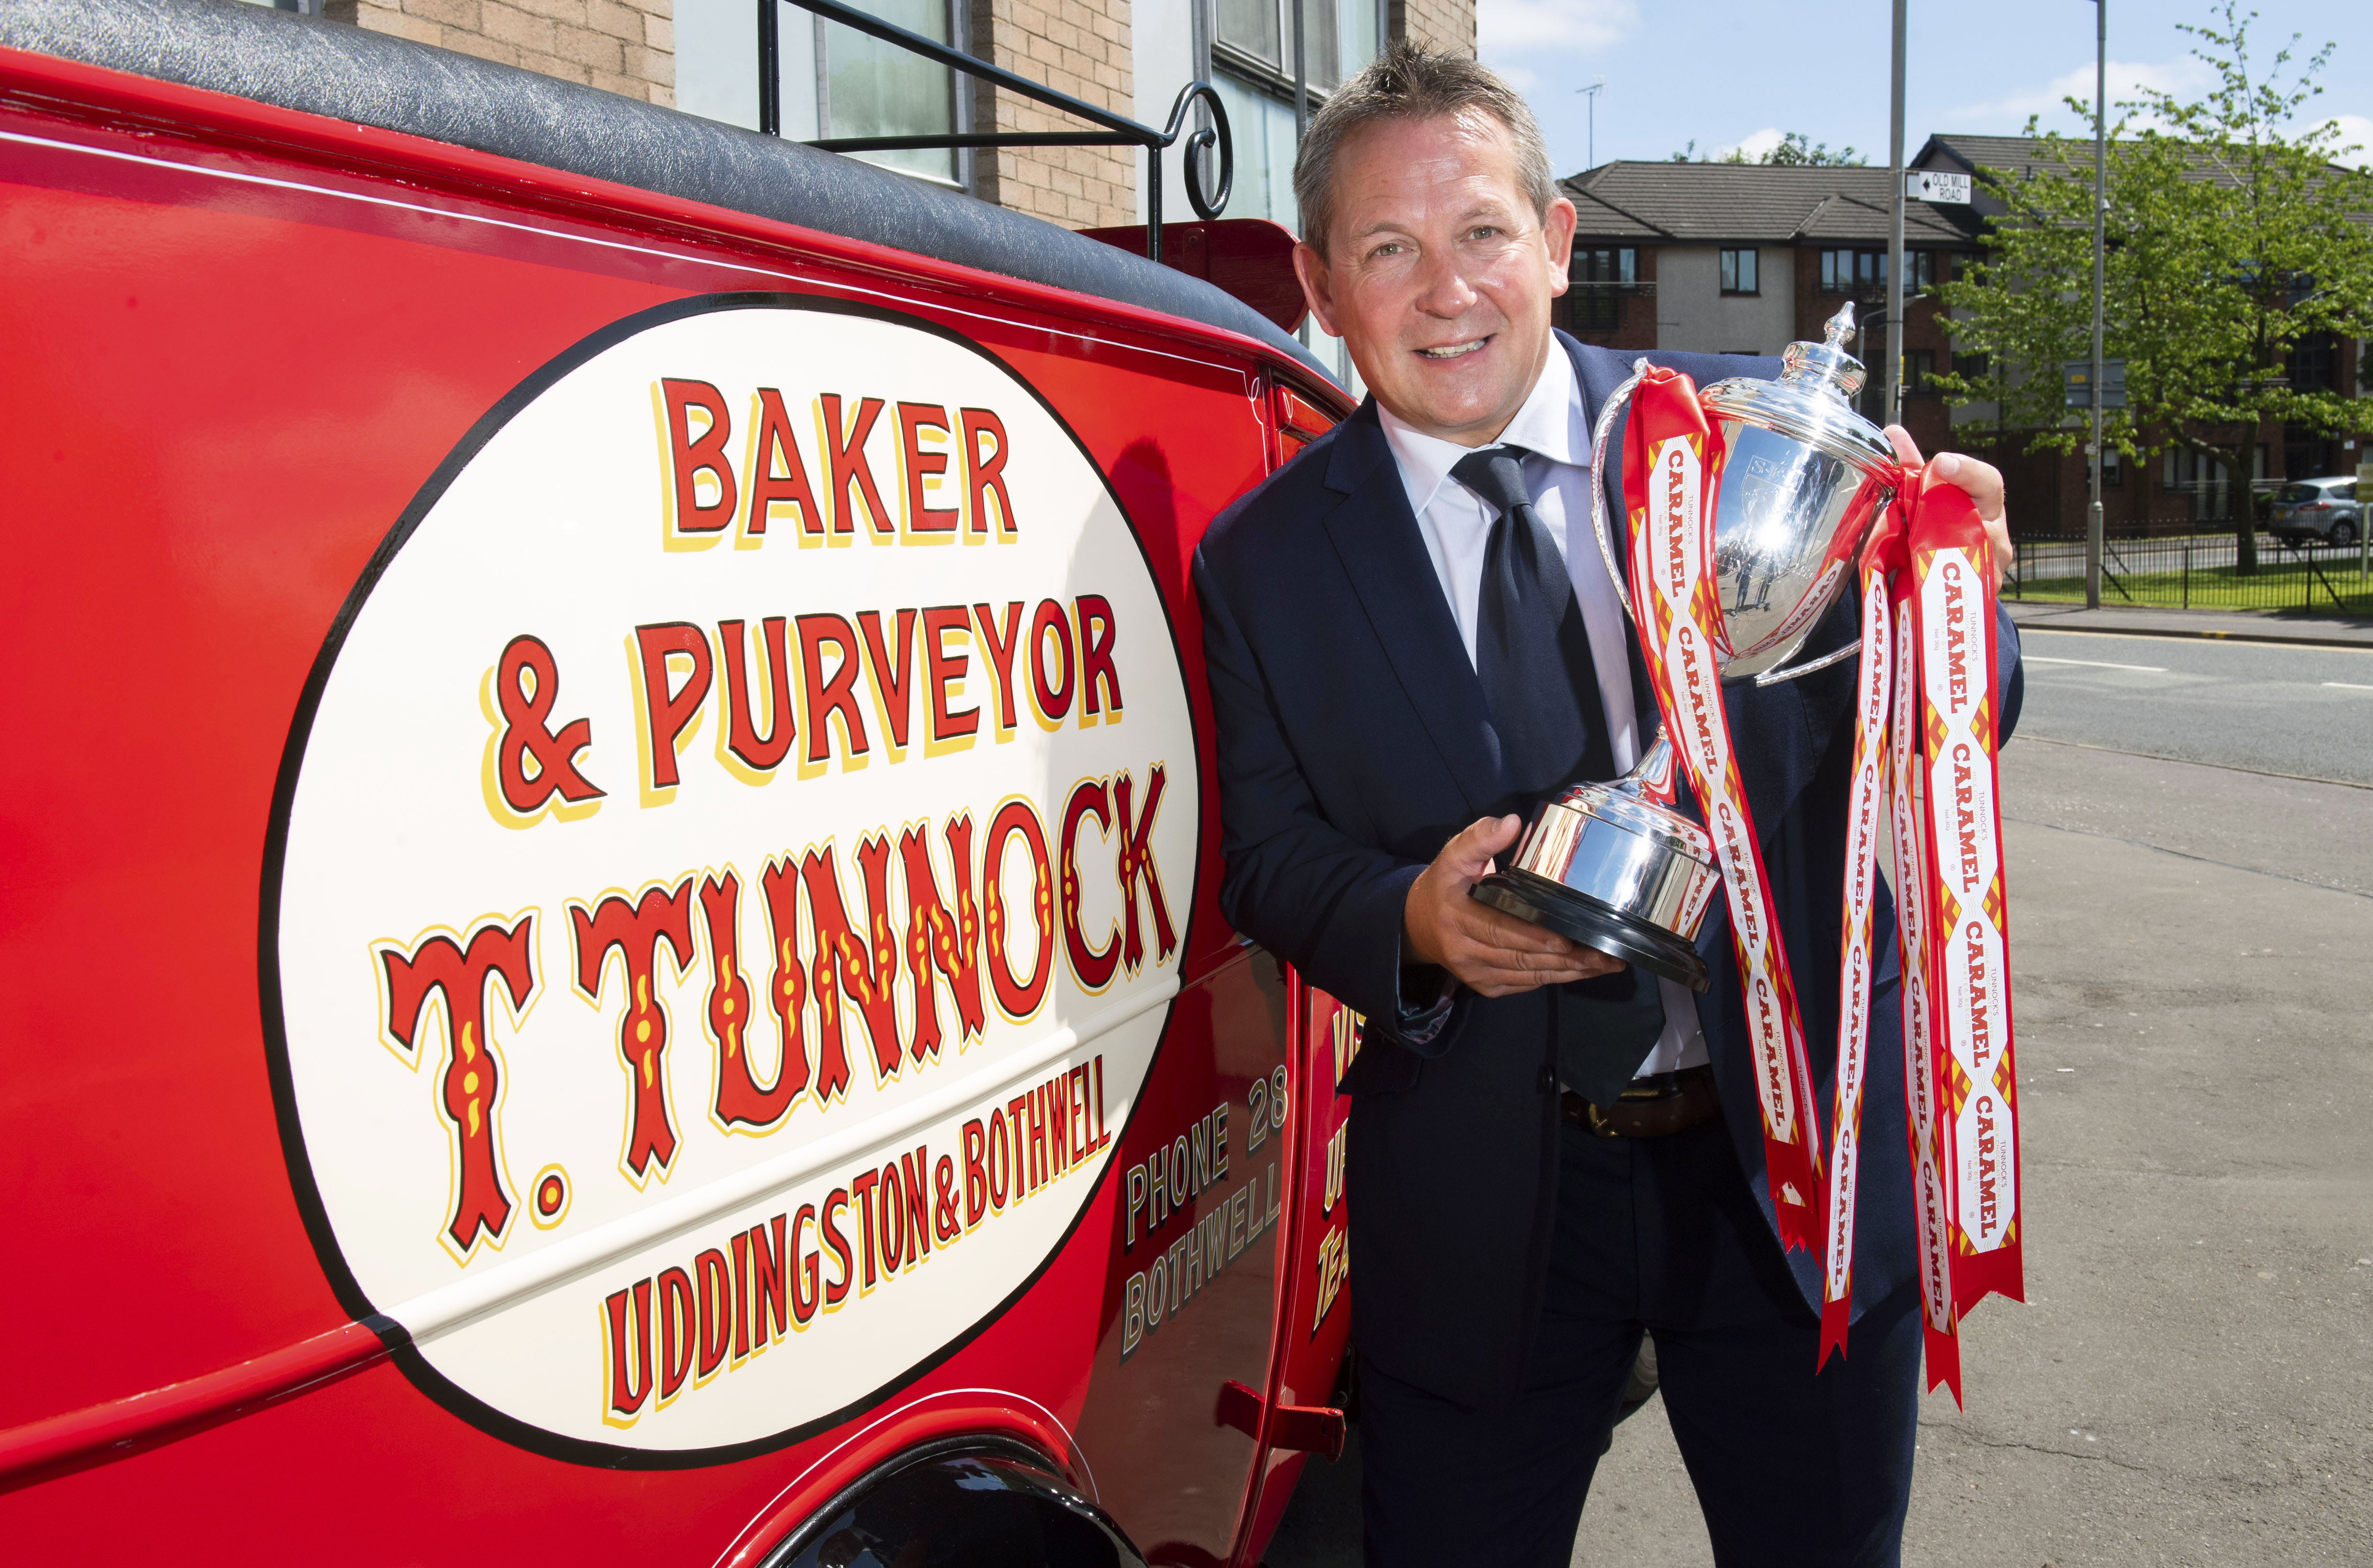 Billy Dodds with the Tunnock's Caramel Wafer Challenge Cup.